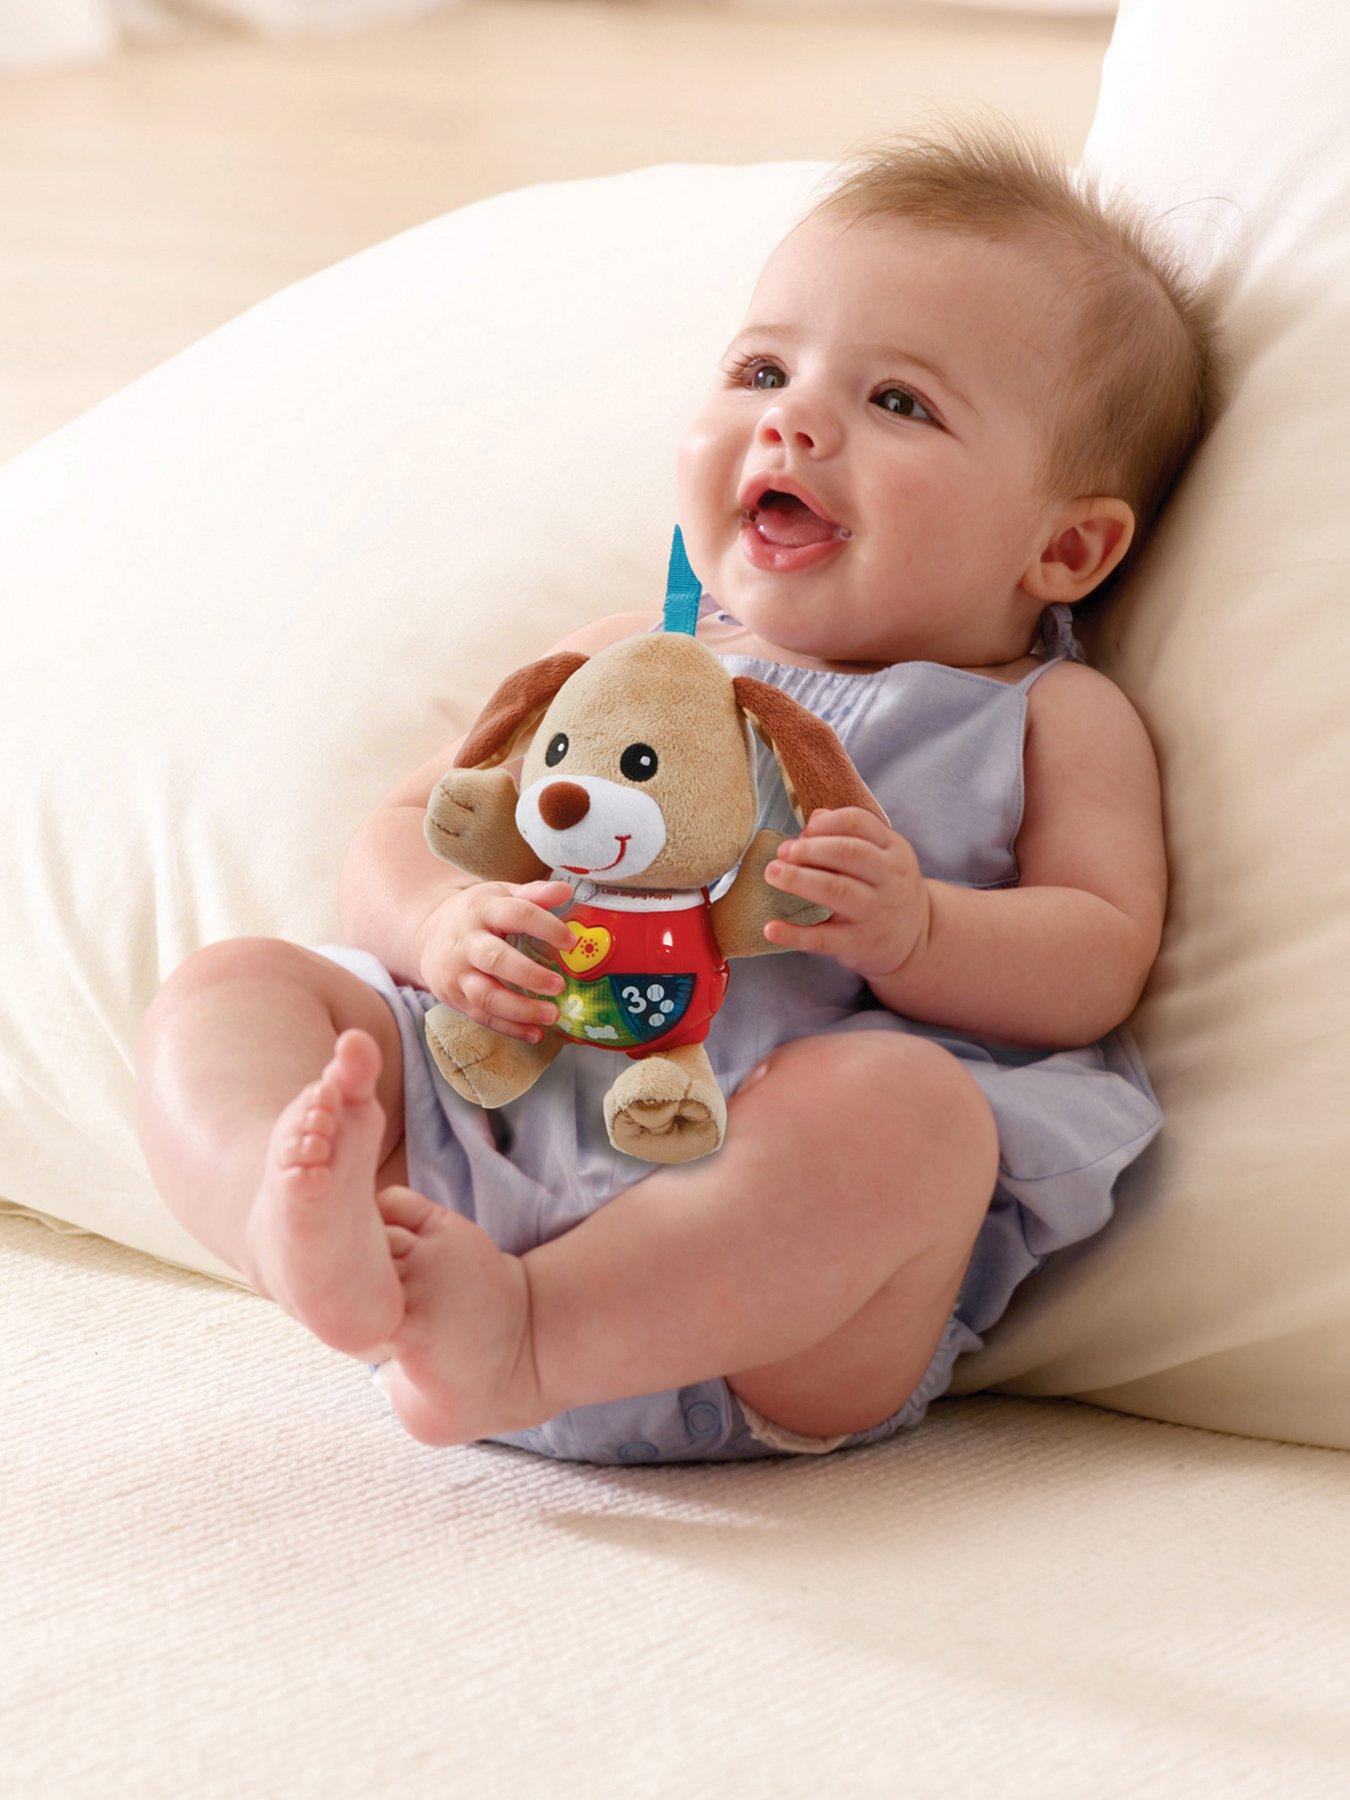 VTech® Sing-It-Out Little Microphone™: Musical Playtime for Kids